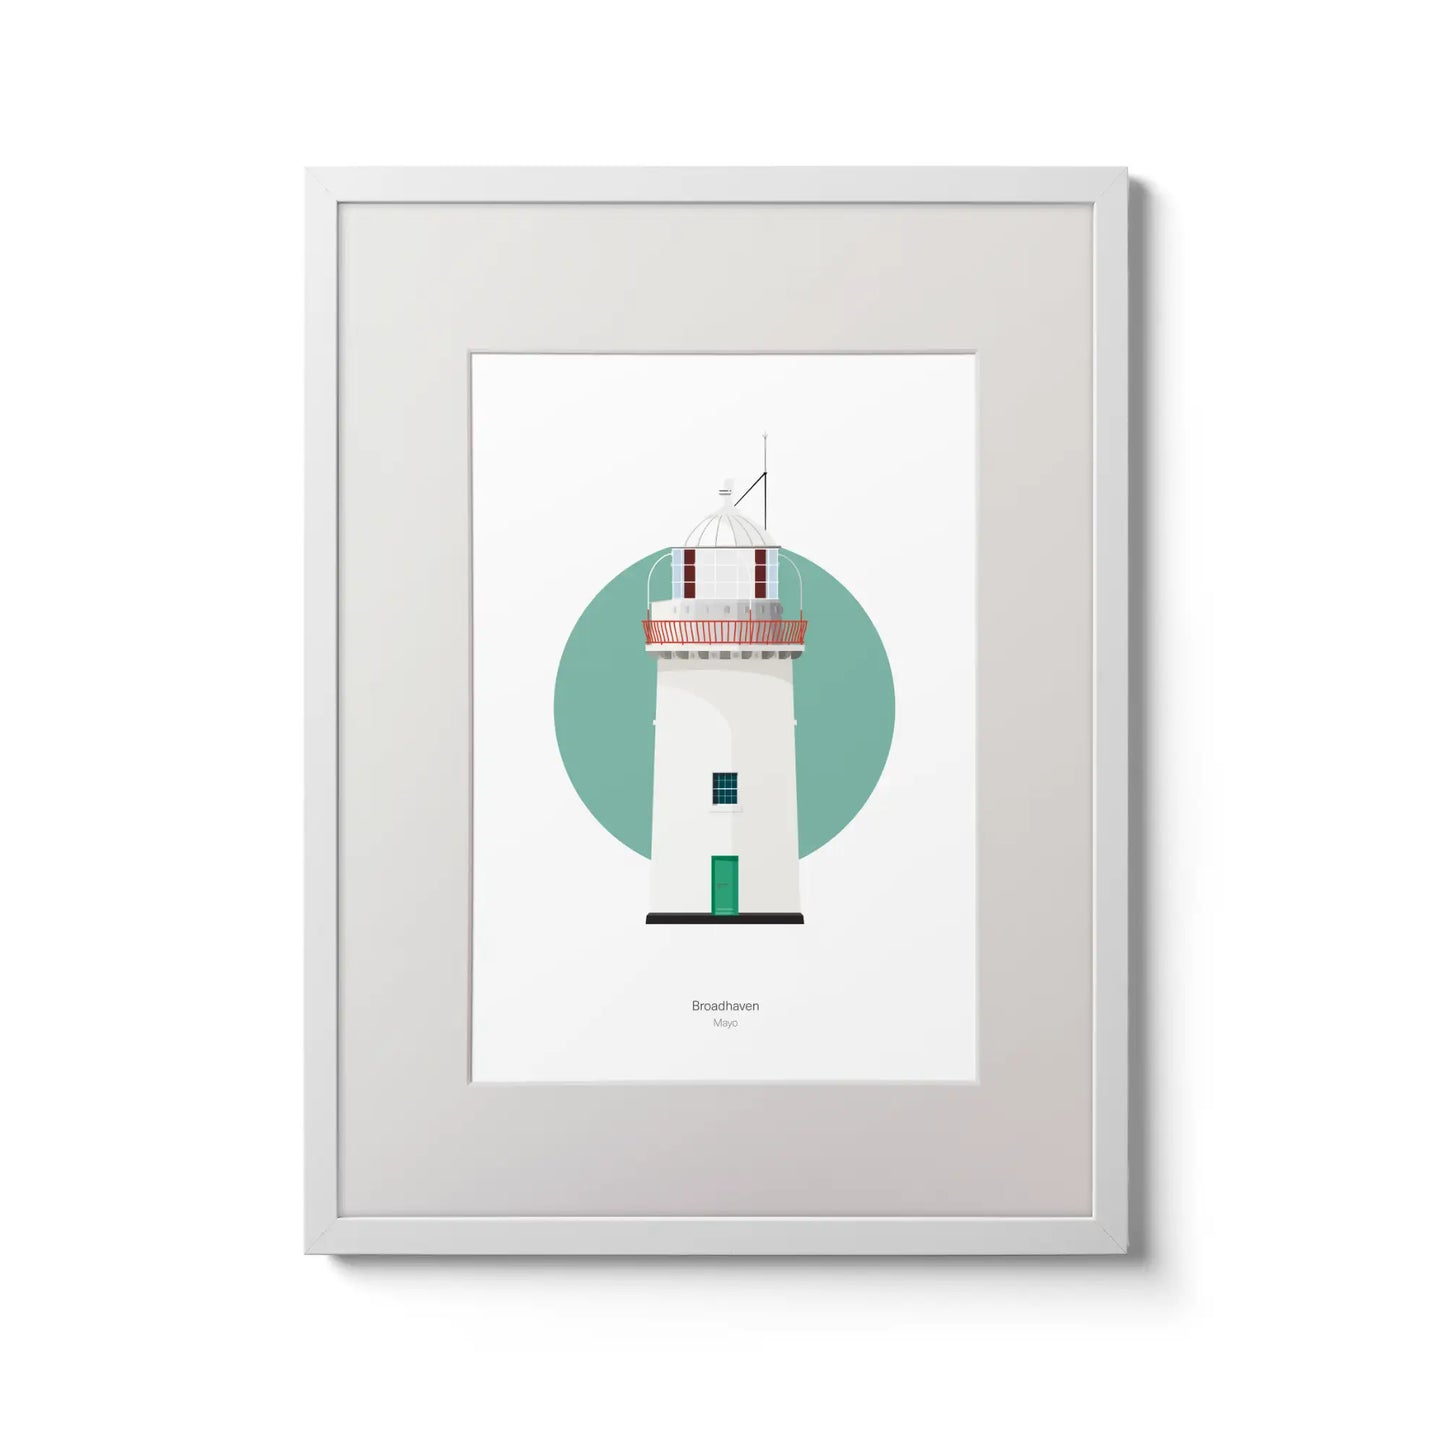 Illustration of Broadhaven lighthouse on a white background inside light blue square,  in a white frame measuring 30x40cm.